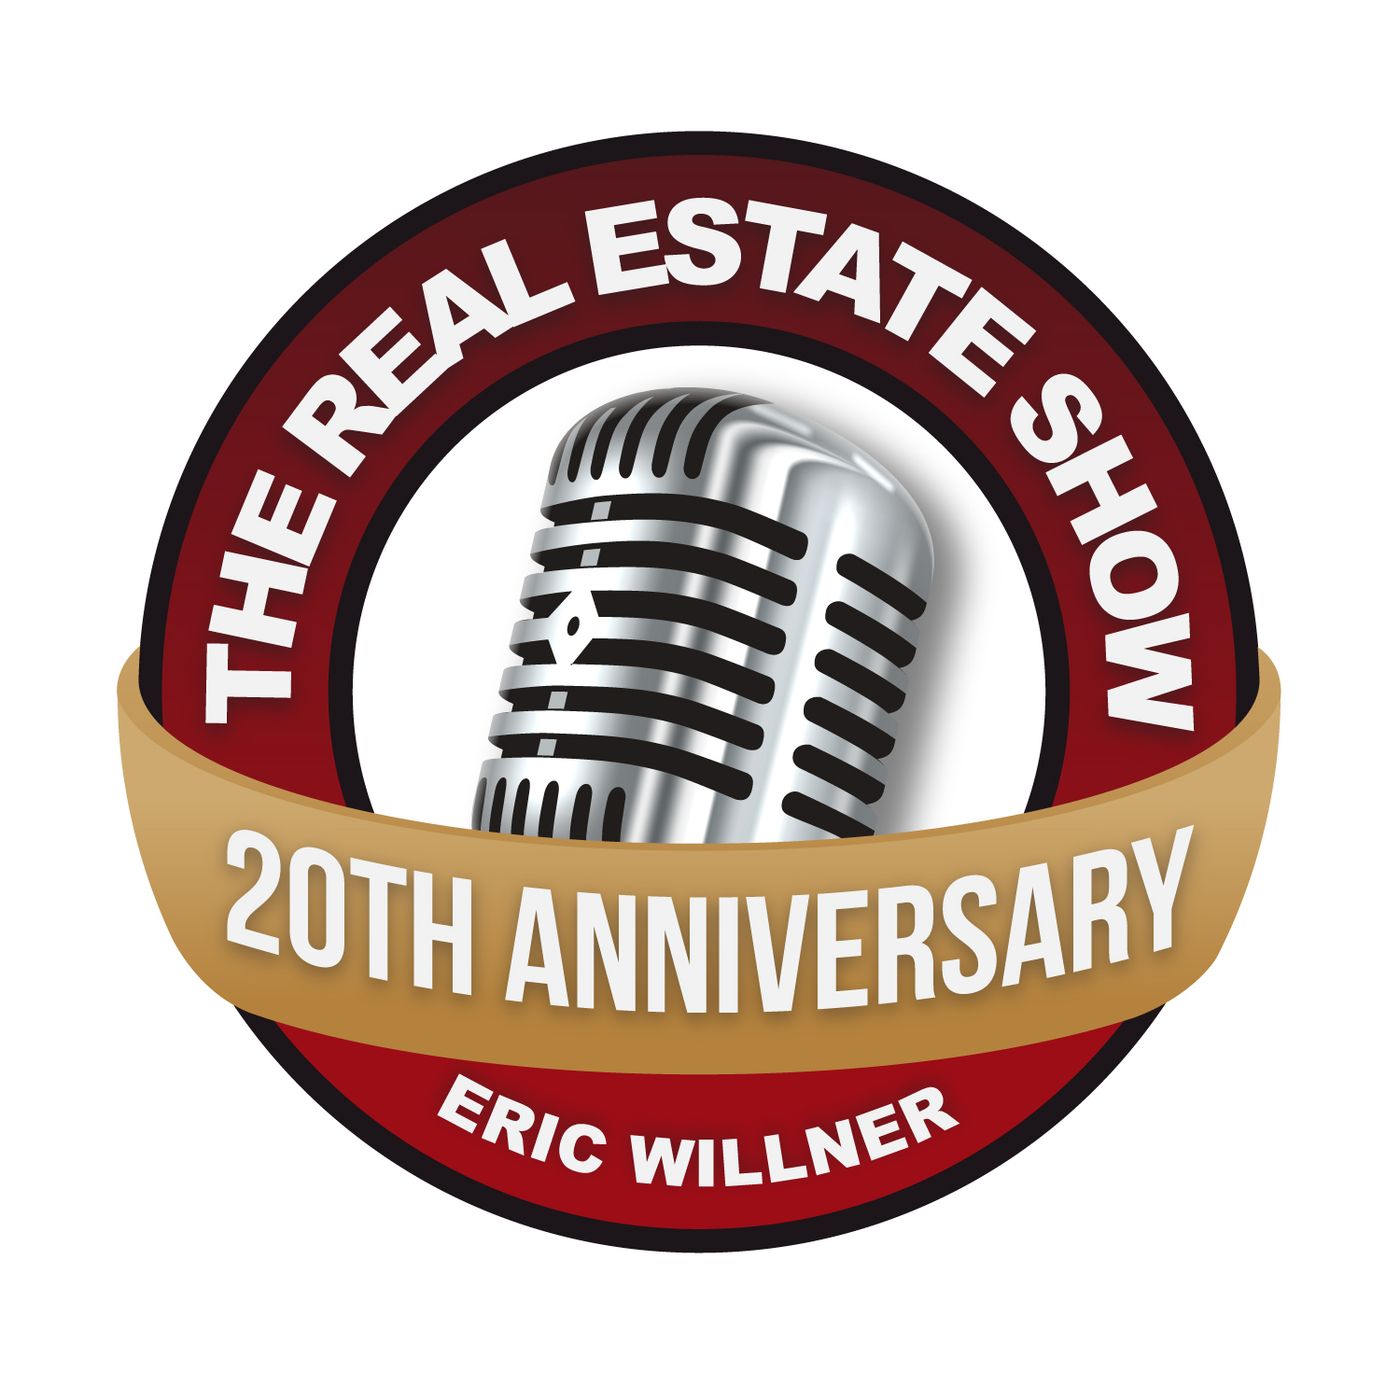 The Real Estate Show